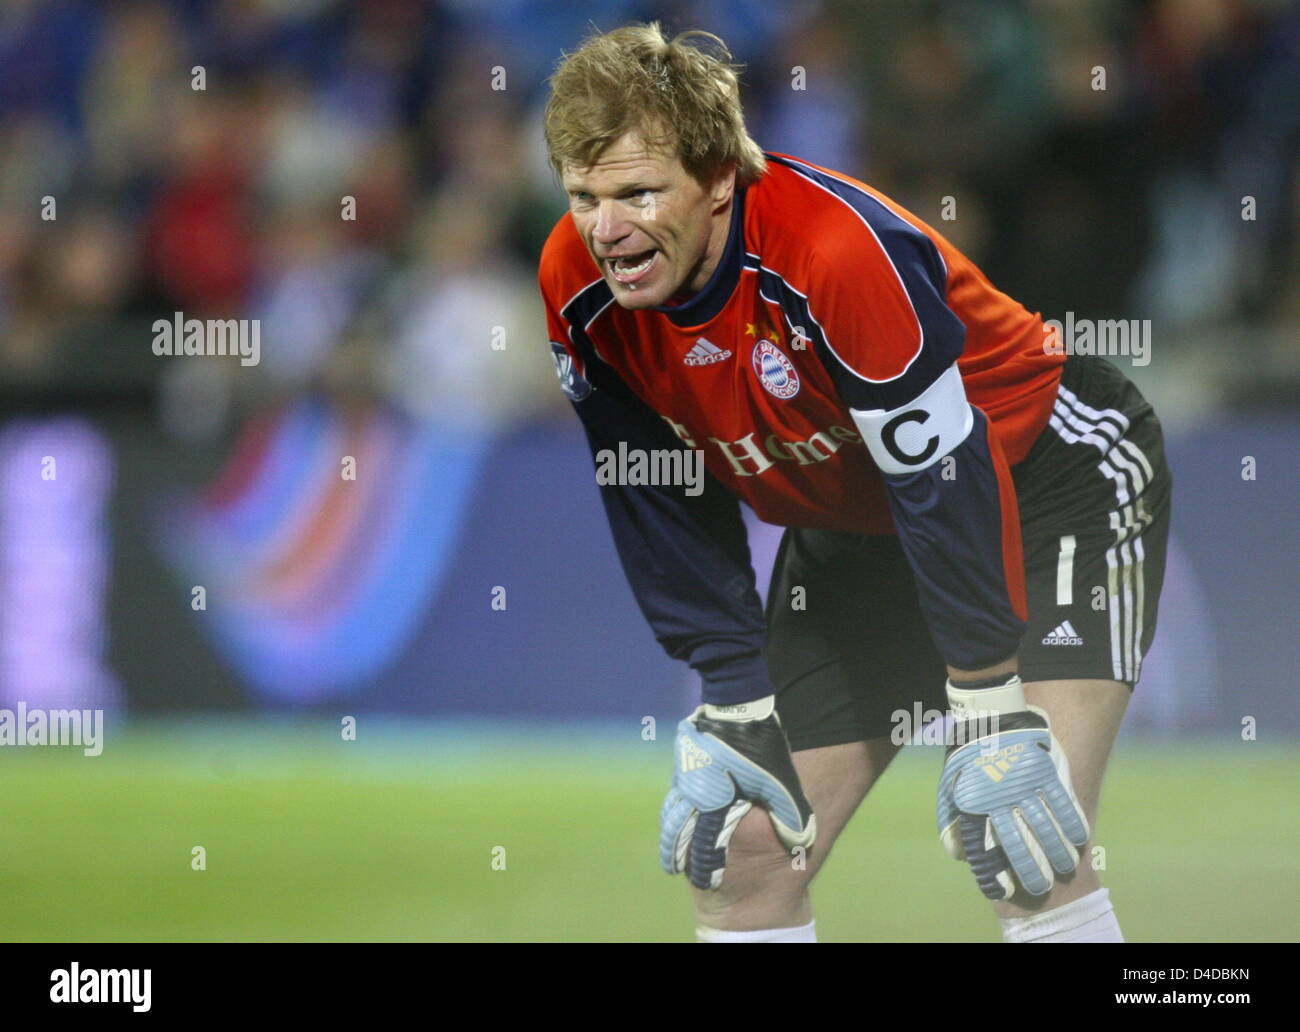 Munich's goalie Oliver Kahn pictured in the UEFA Cup quarter-finals 2nd leg Getafe CF v FC Bayern Munich at Coliseum Alfonso Perez stadium in Madrid, Spain, 10 April 2008. The match ended in a 3-3 draw a.e.t. and 4-4 on aggregate with a weak Munich squad moving up to semi-finals due to having scored more away goals. Photo: Matthias Schrader Stock Photo